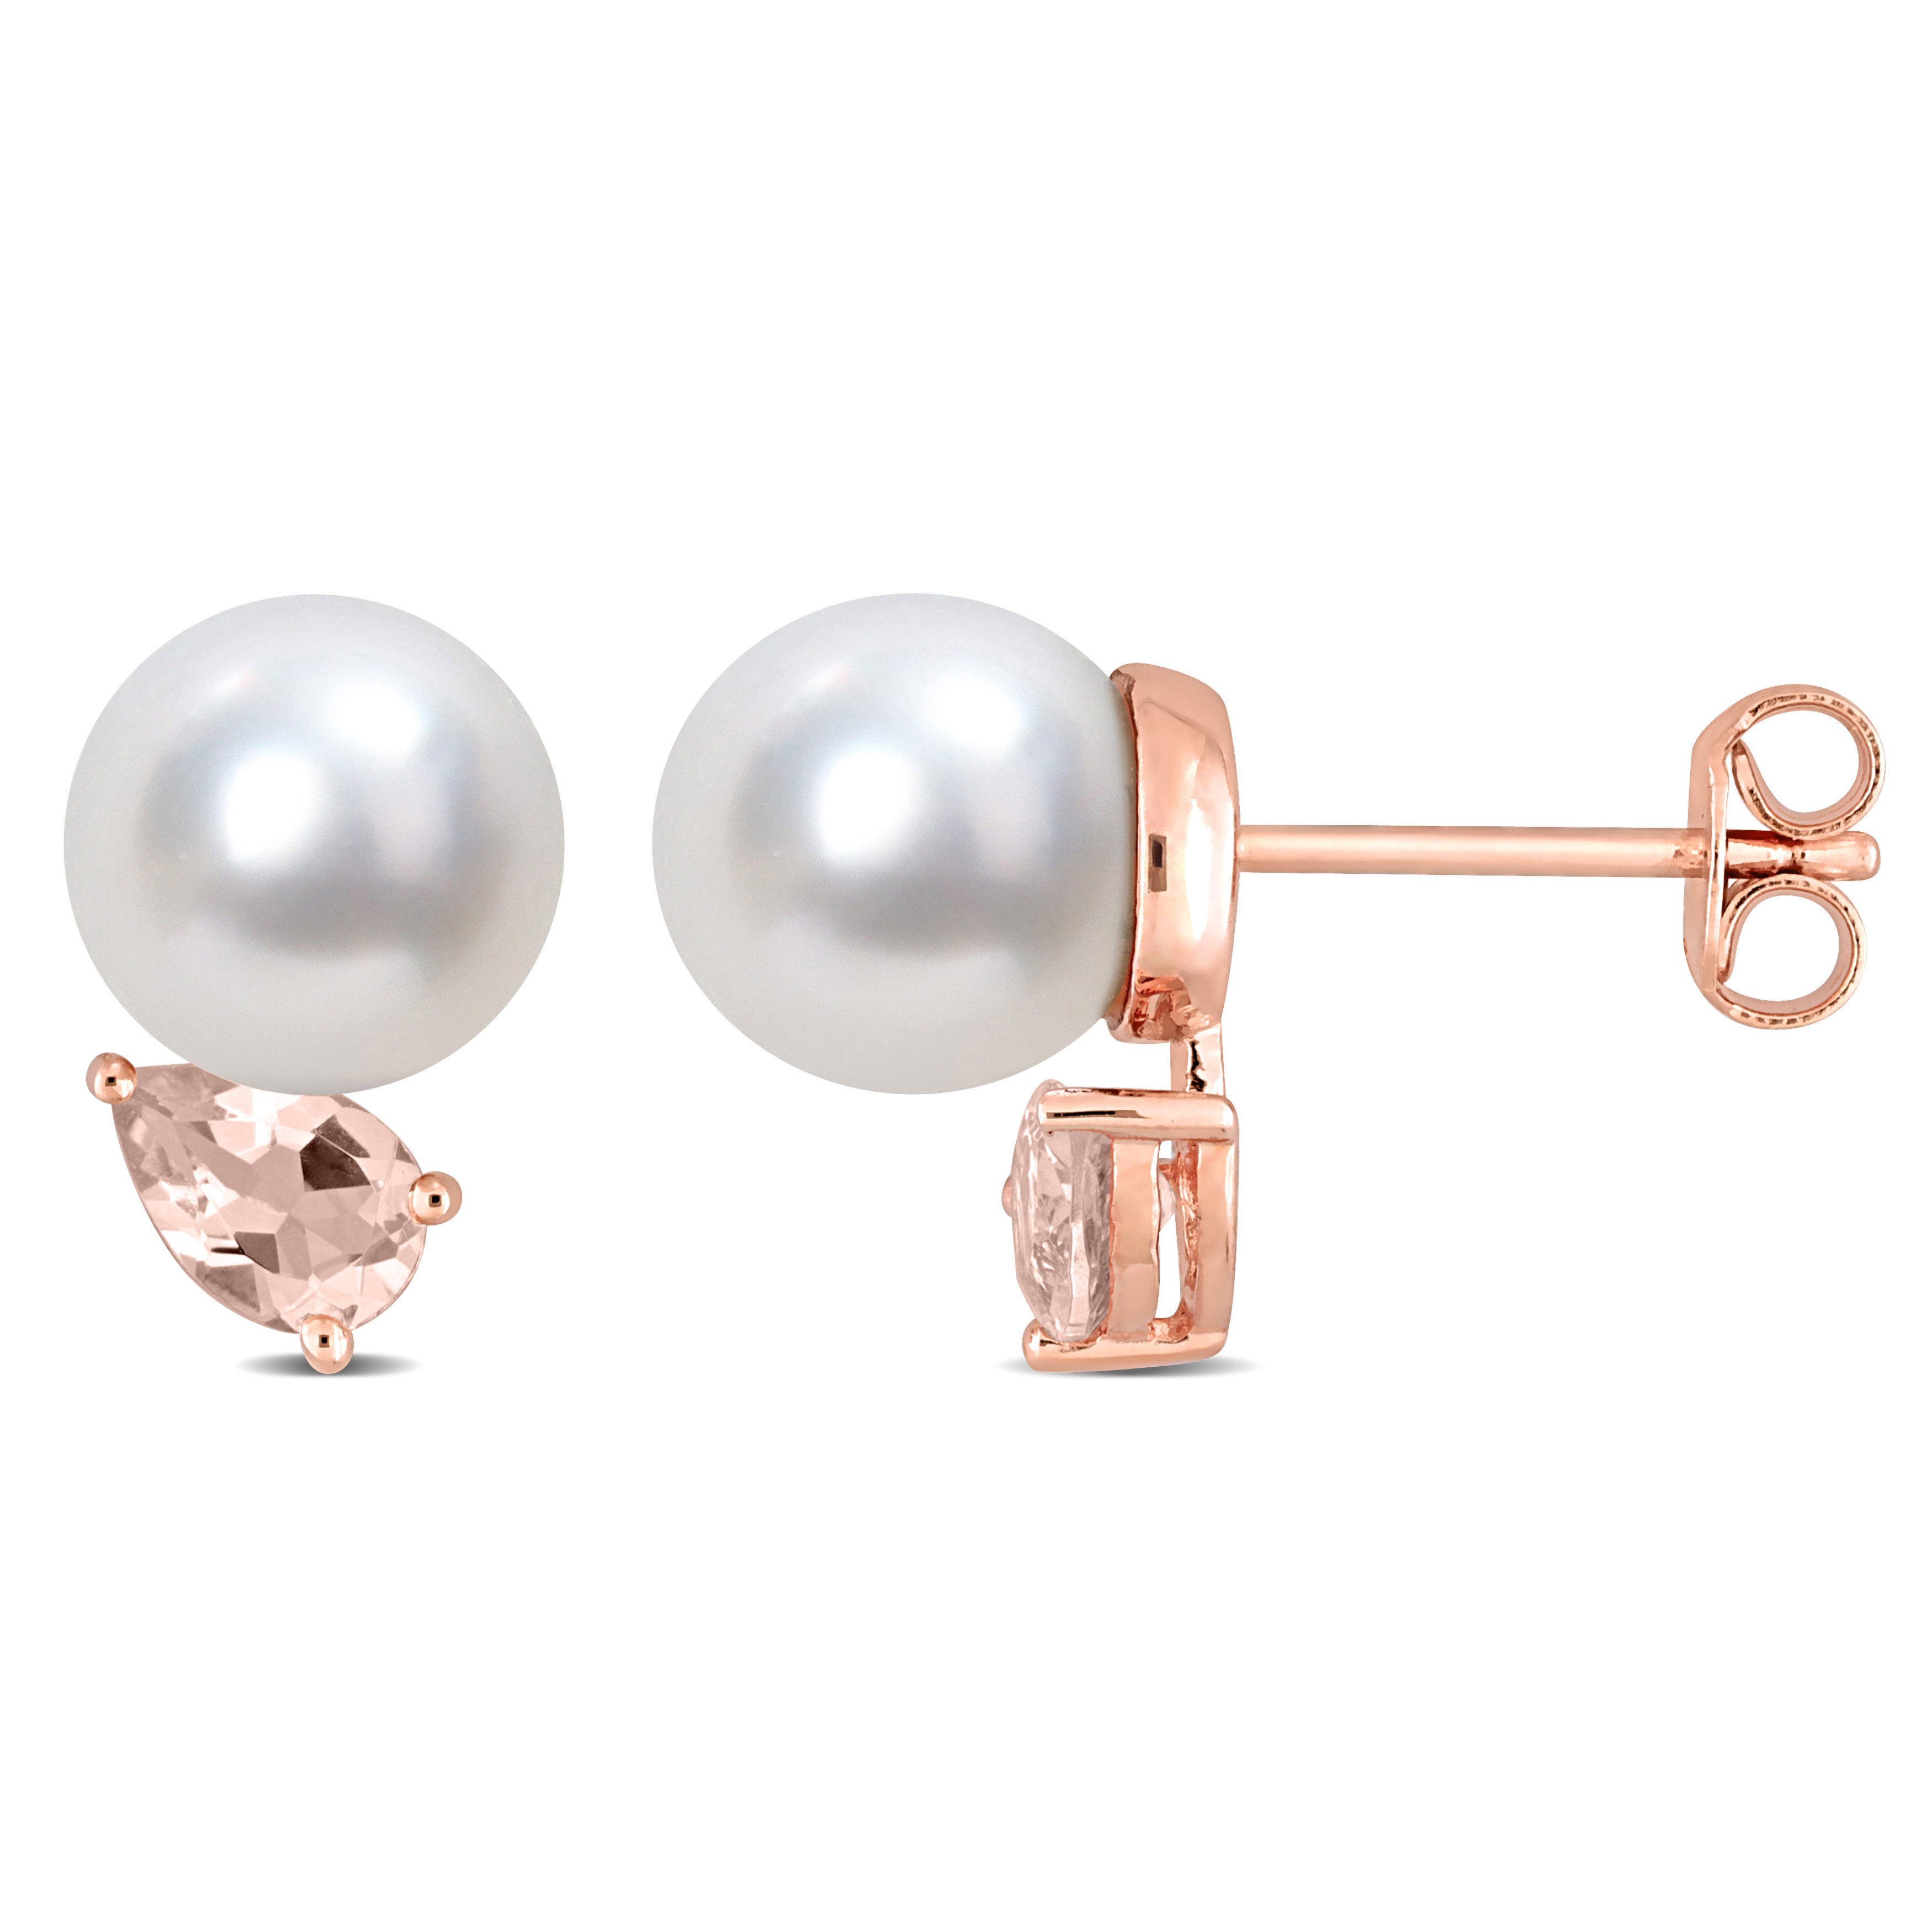 8-9 MM South Sea Cultured Pearl and 4/5 CT TGW Morganite Stud Earrings in Rose Plated Sterling Silver